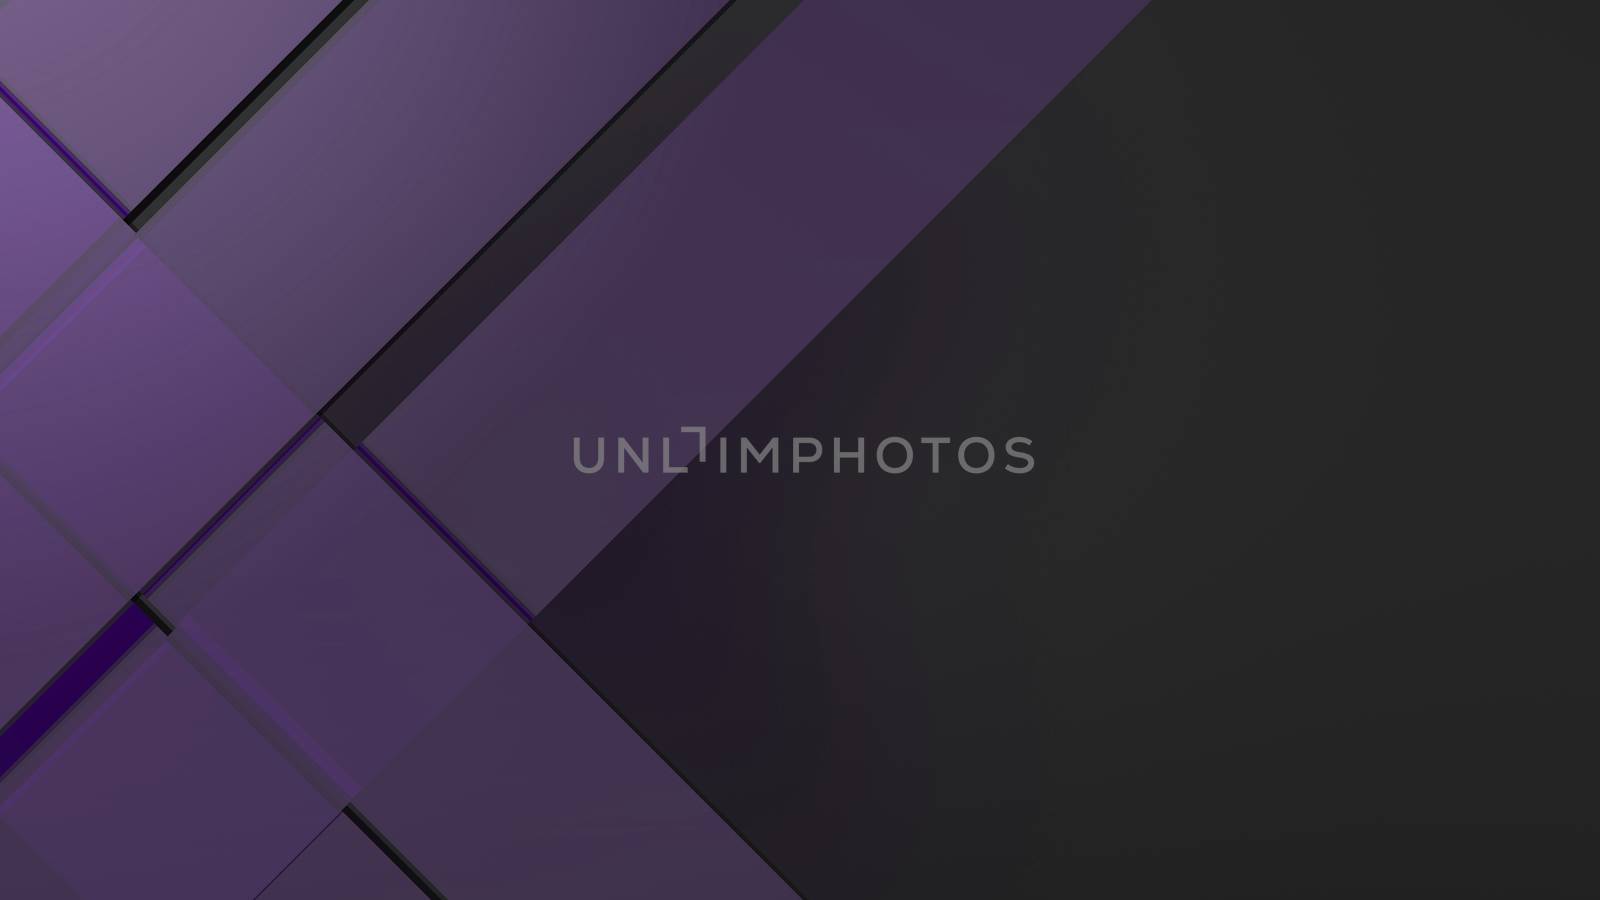 Diagonal violet dynamic stripes on black background. Modern abstract 3d render background with lines and dark shadows